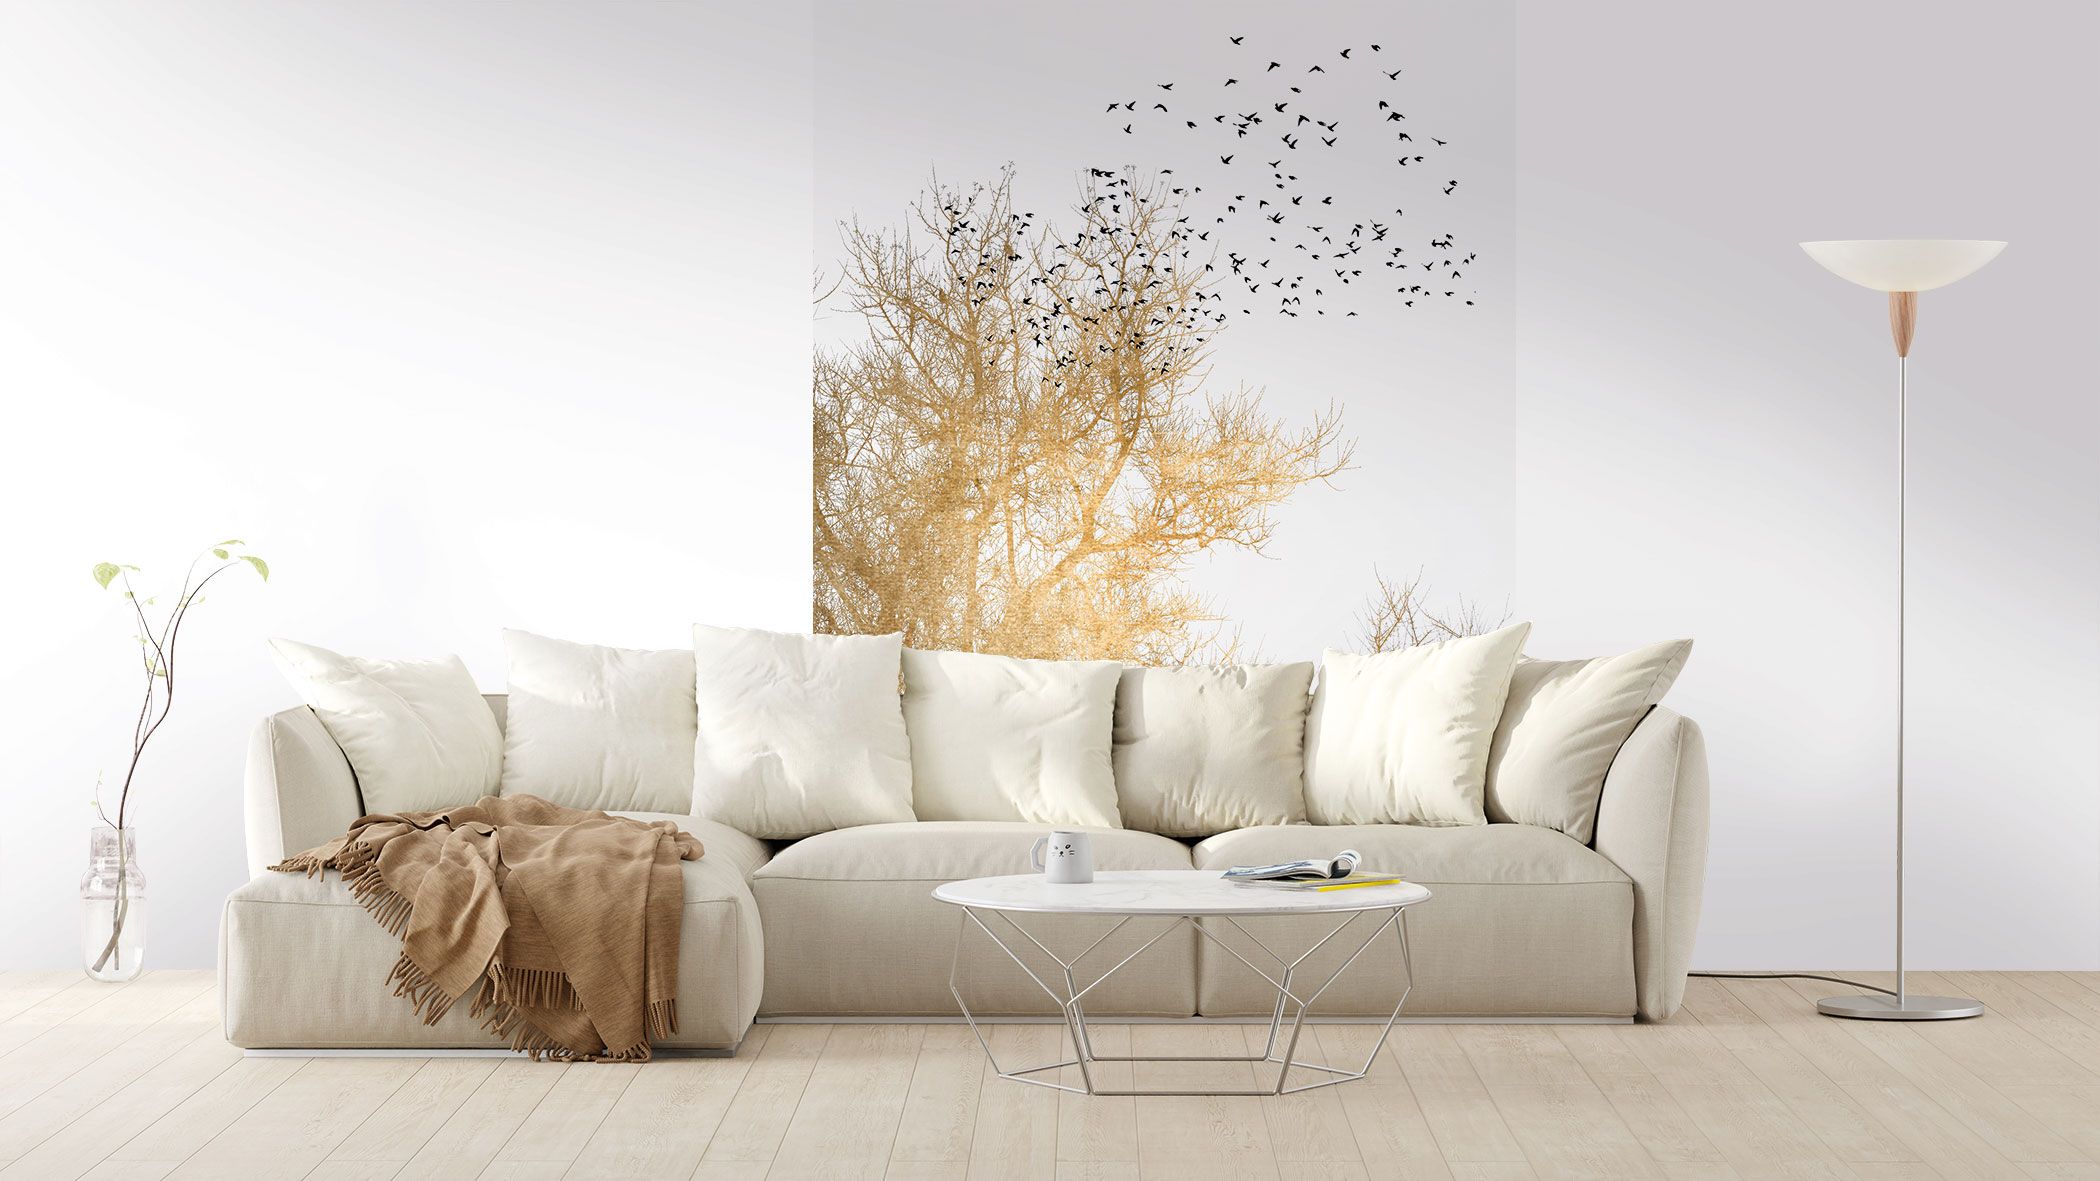 Accent wall in living room photo wallpaper with golden tree crown DD119897